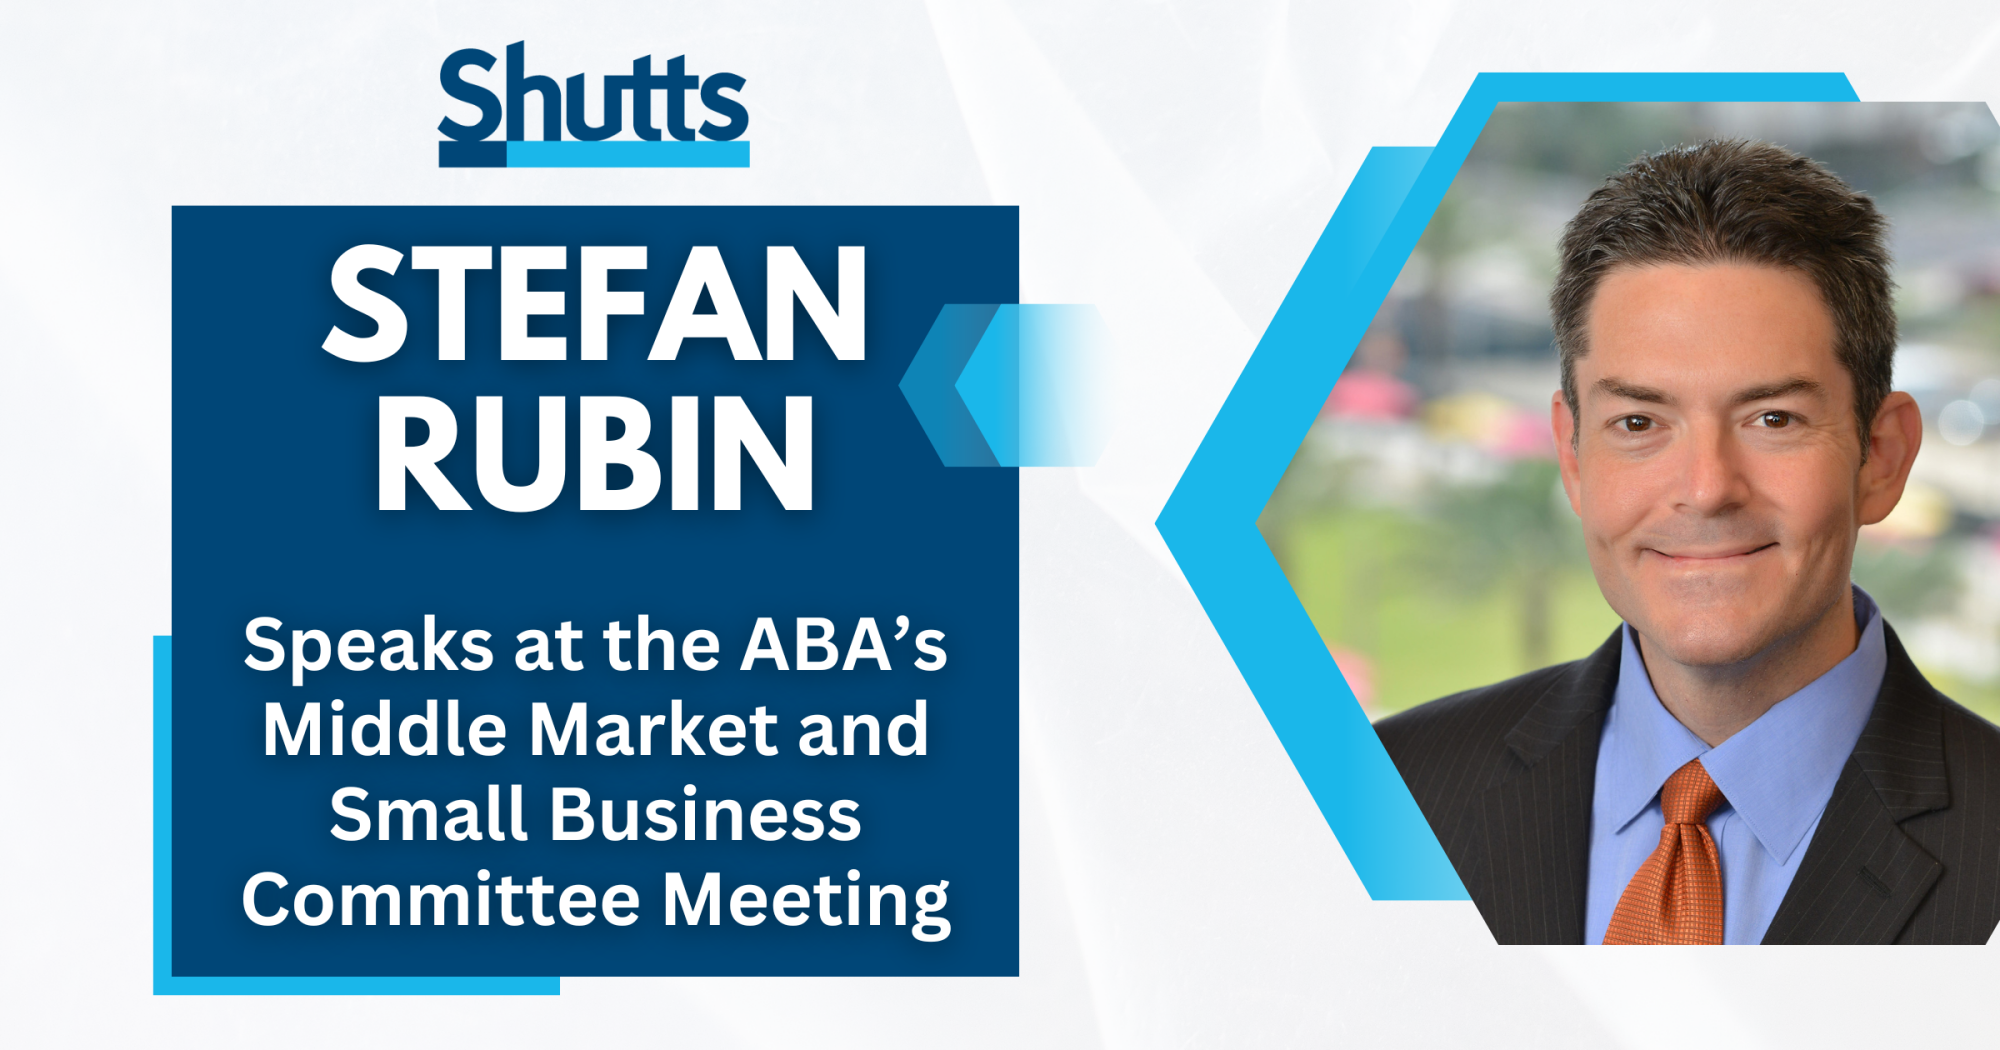 Stefan Rubin Speaks at the ABA’s Middle Market and Small Business Committee Meeting